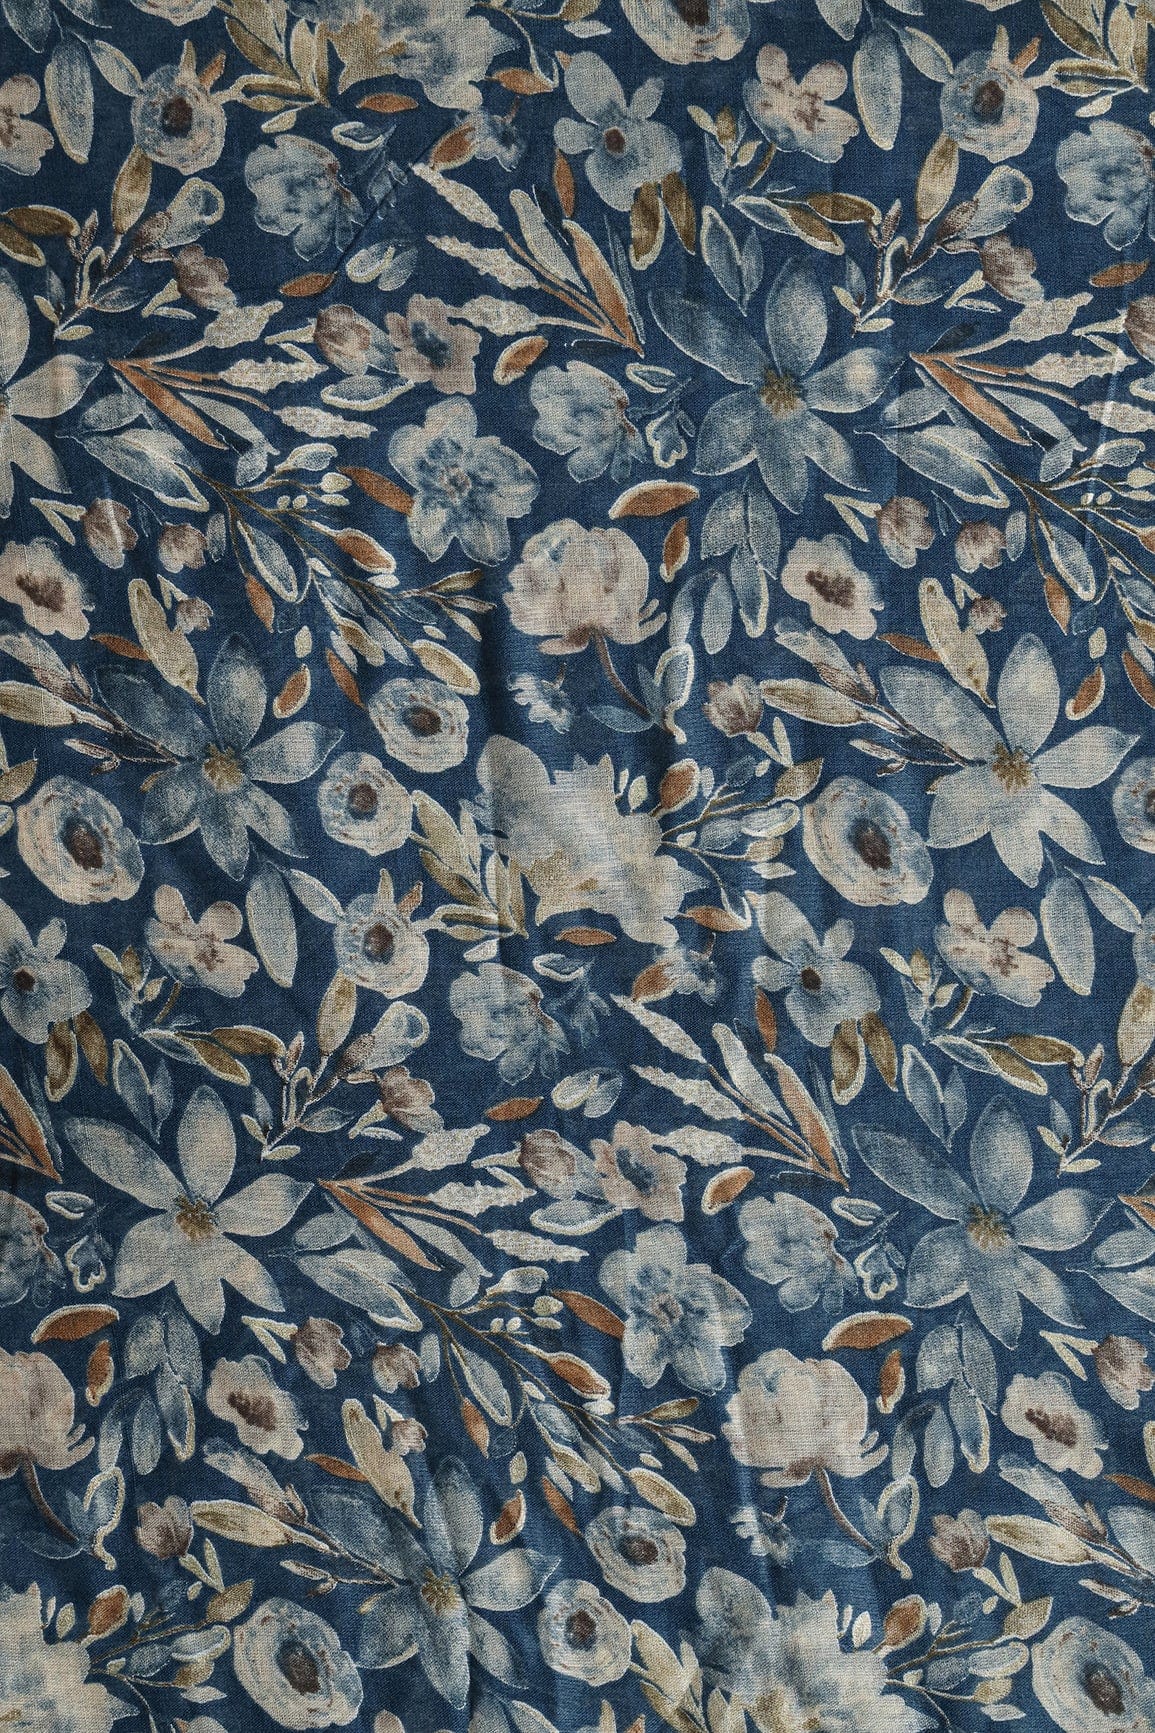 doeraa Prints White And Blue Floral Foil Print On Yale Blue Pure Mul Cotton Fabric